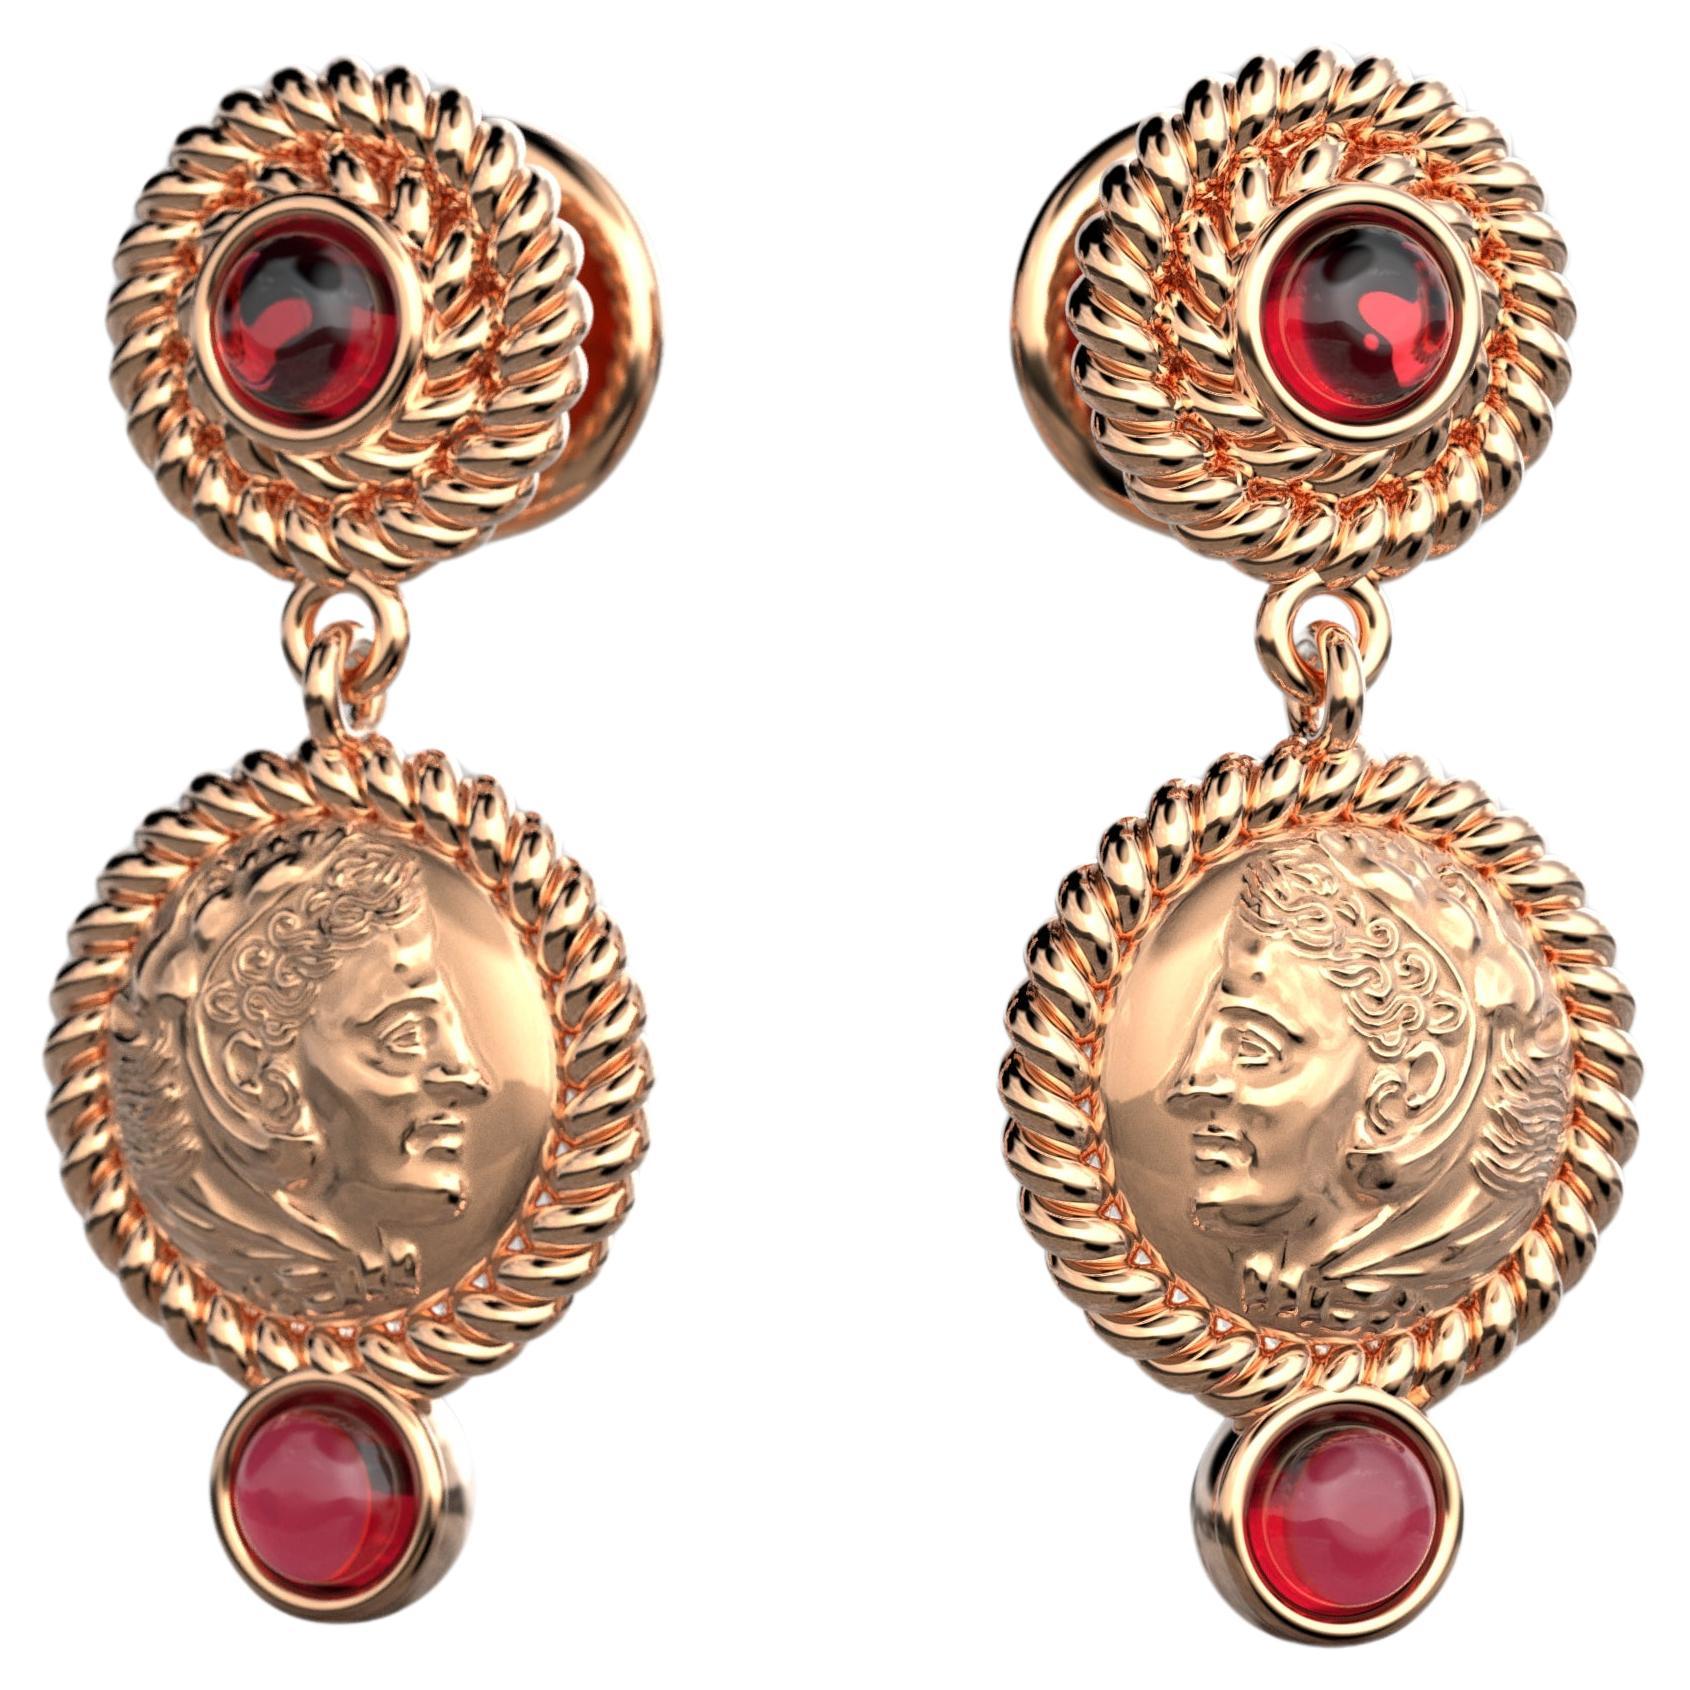 18k Gold Dangle Earrings in Ancient Greek Style | Italian Jewelry made in Italy For Sale